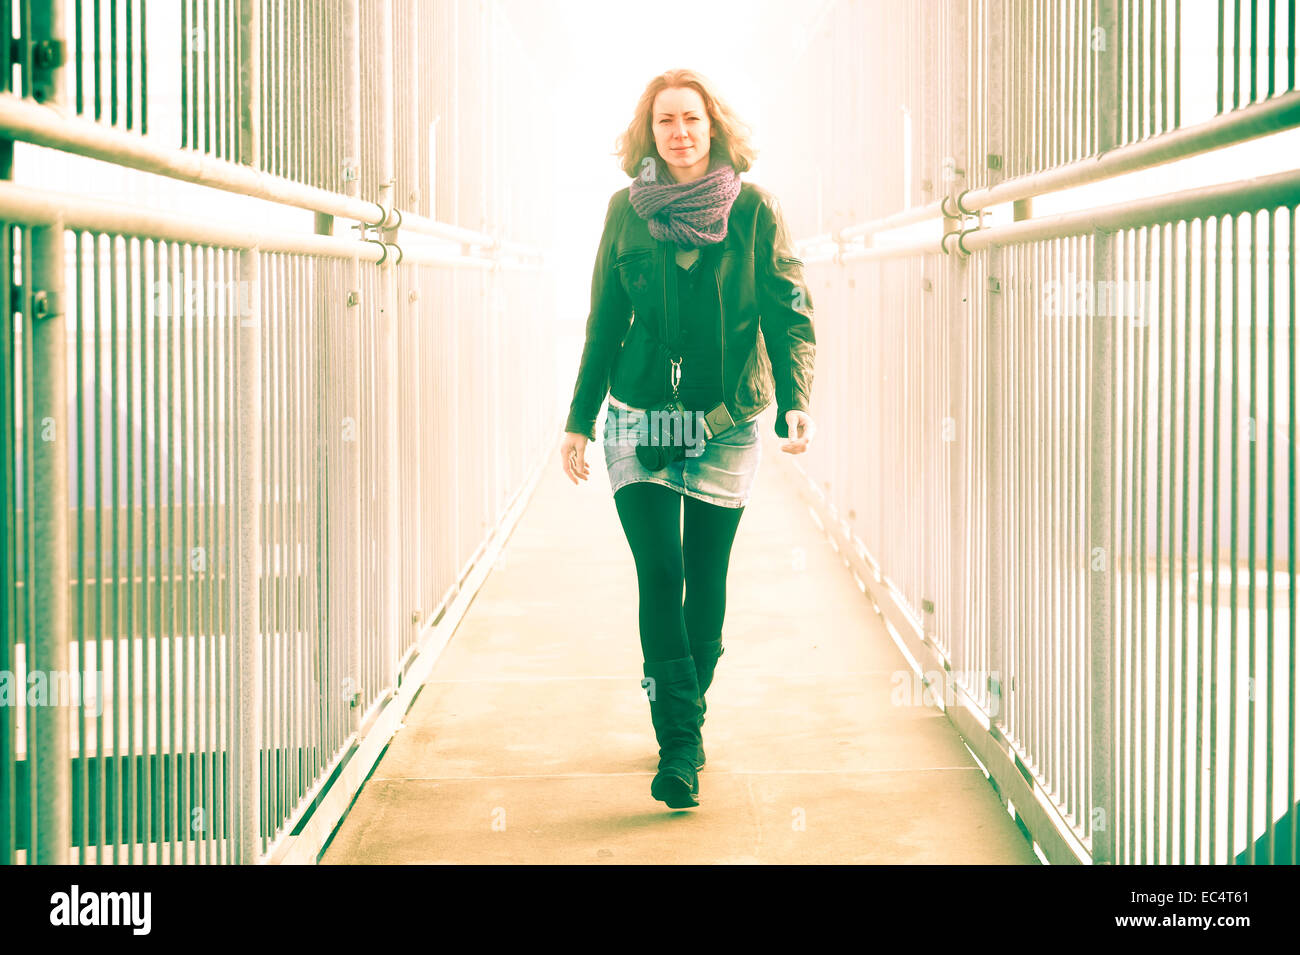 young woman on a path between two metal fences Stock Photo